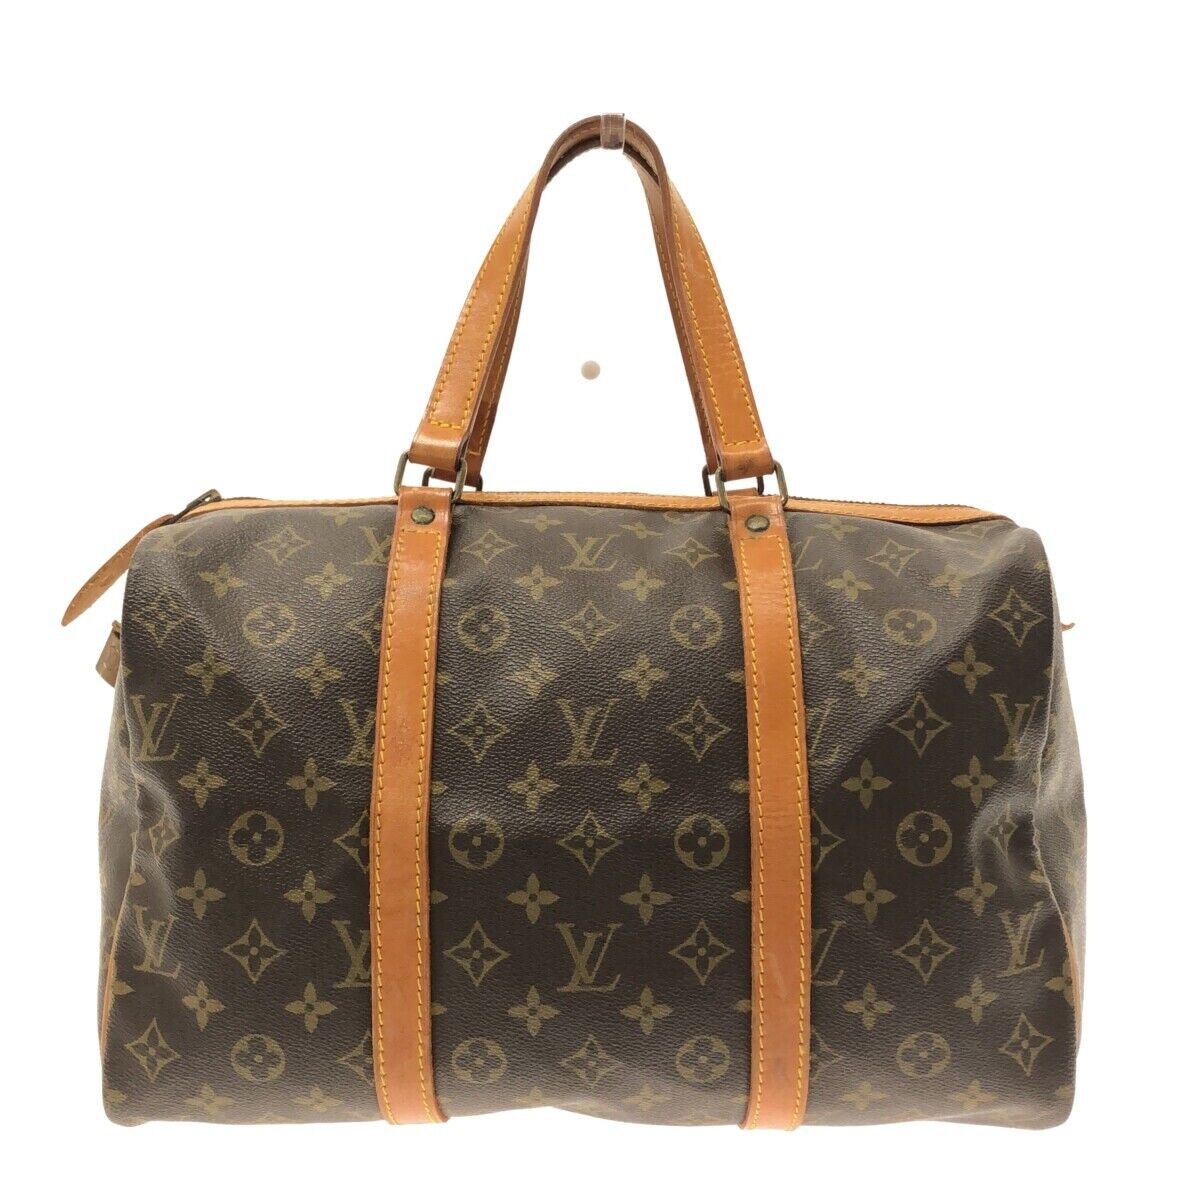 This New Monogram Range At Louis Vuitton SG Is An Instant Classic